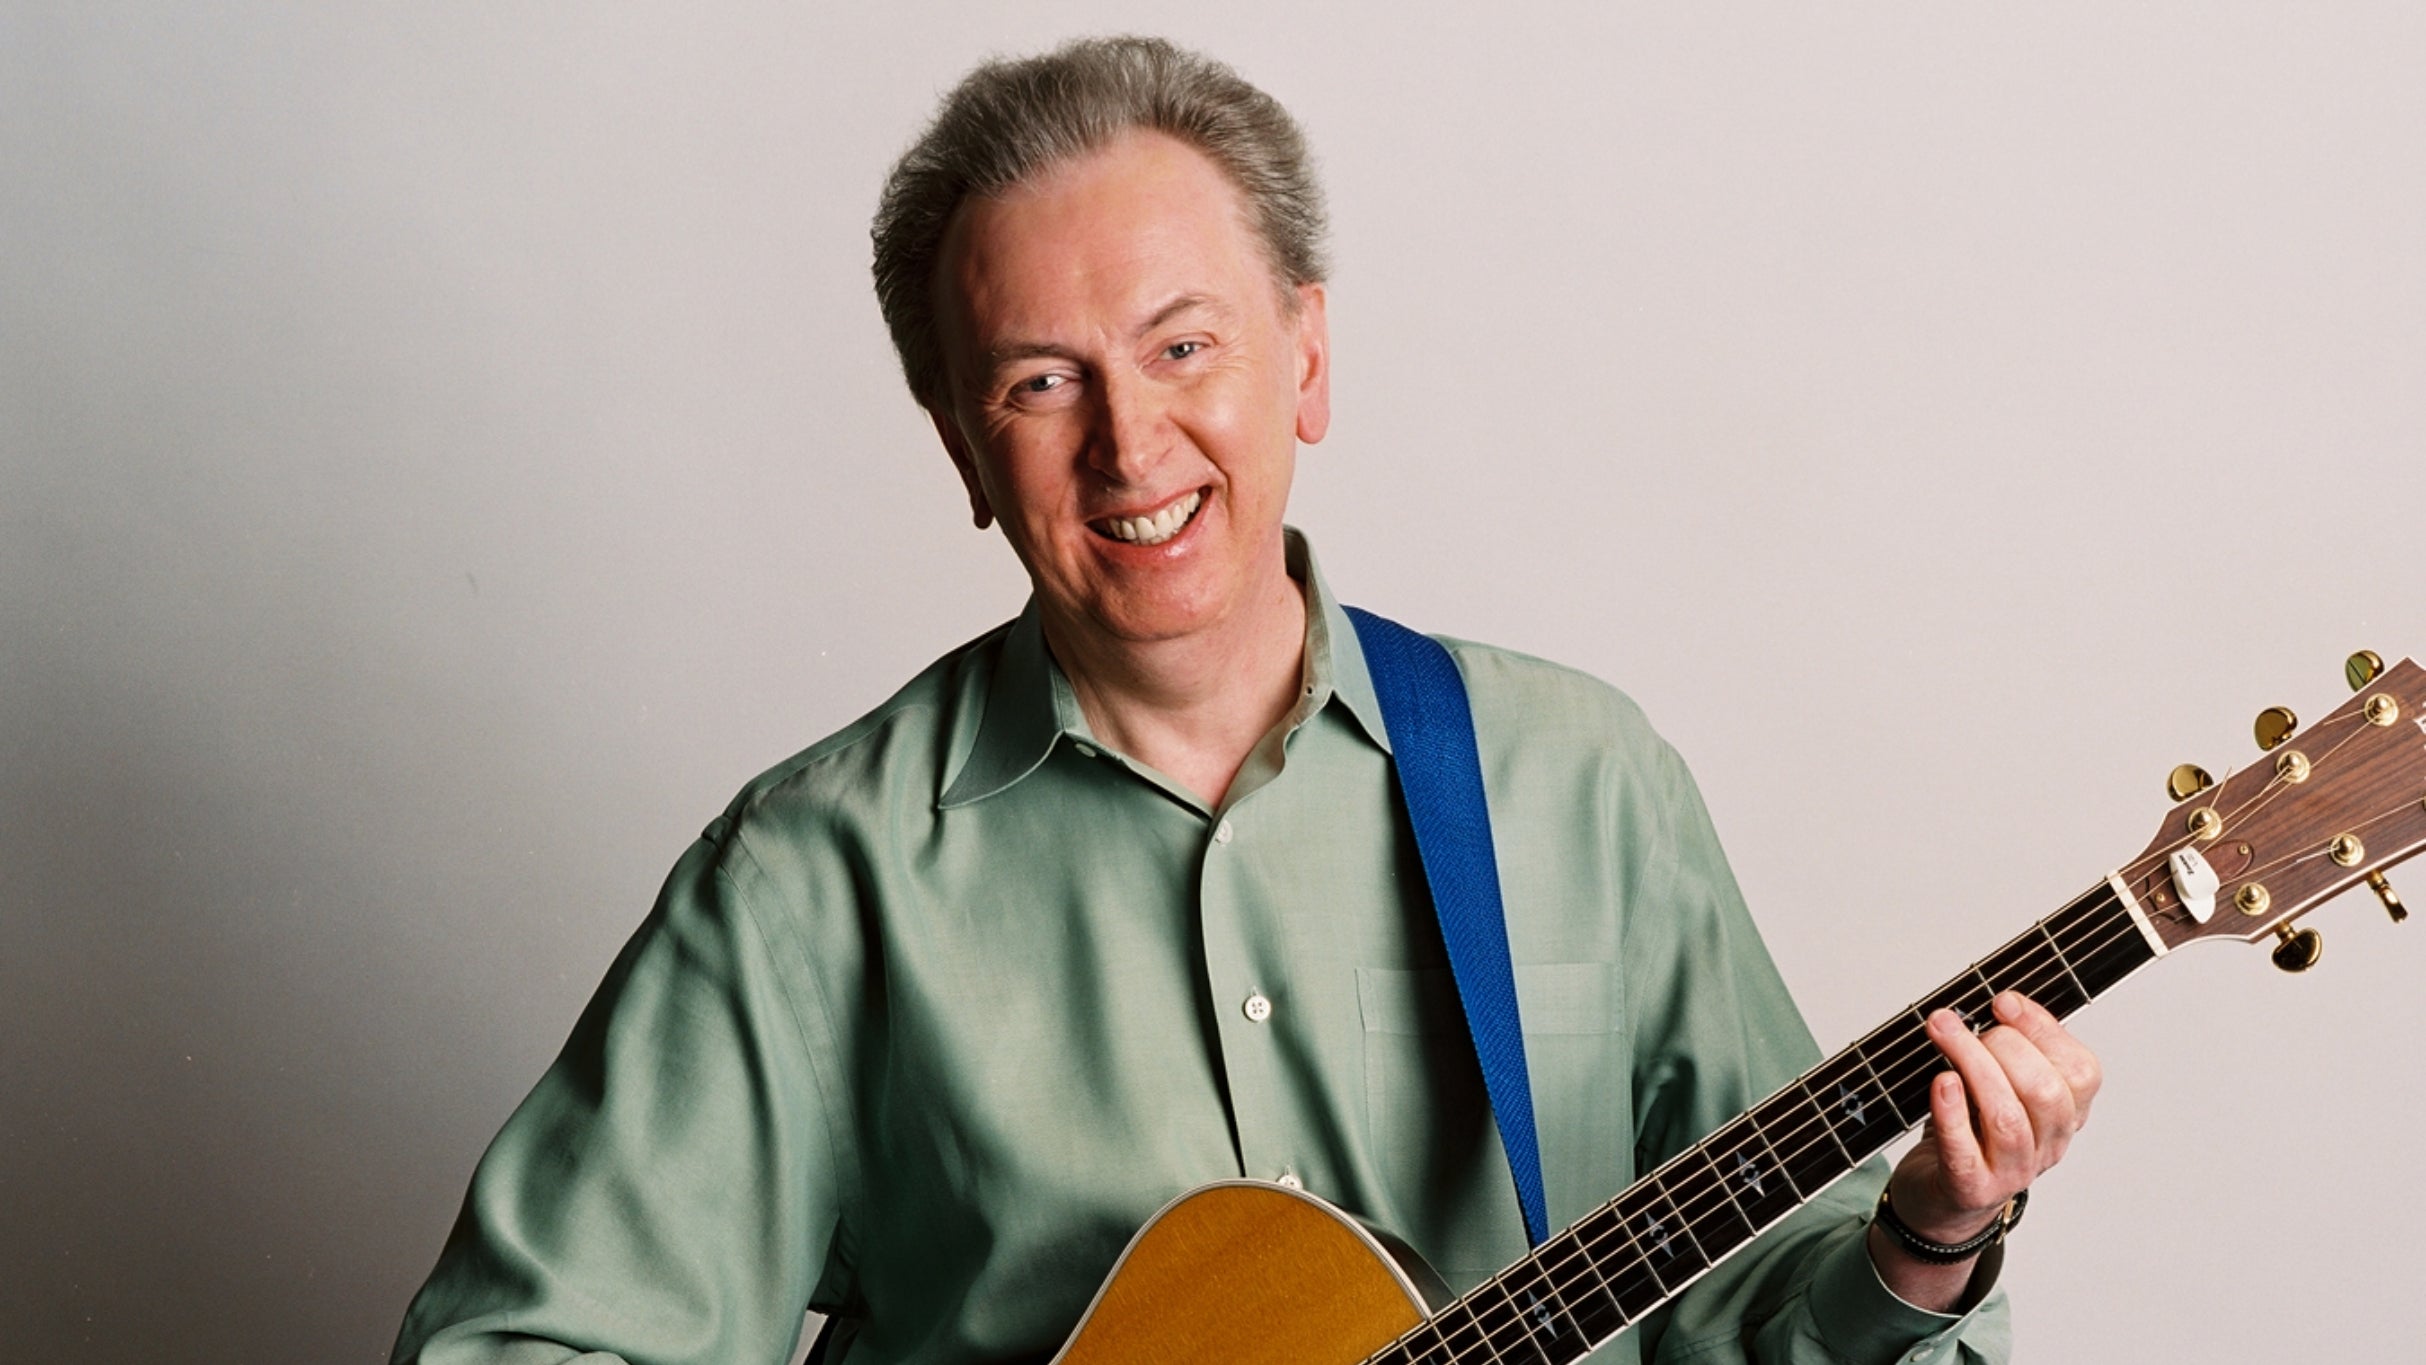 Al Stewart with his band The Empty Pockets